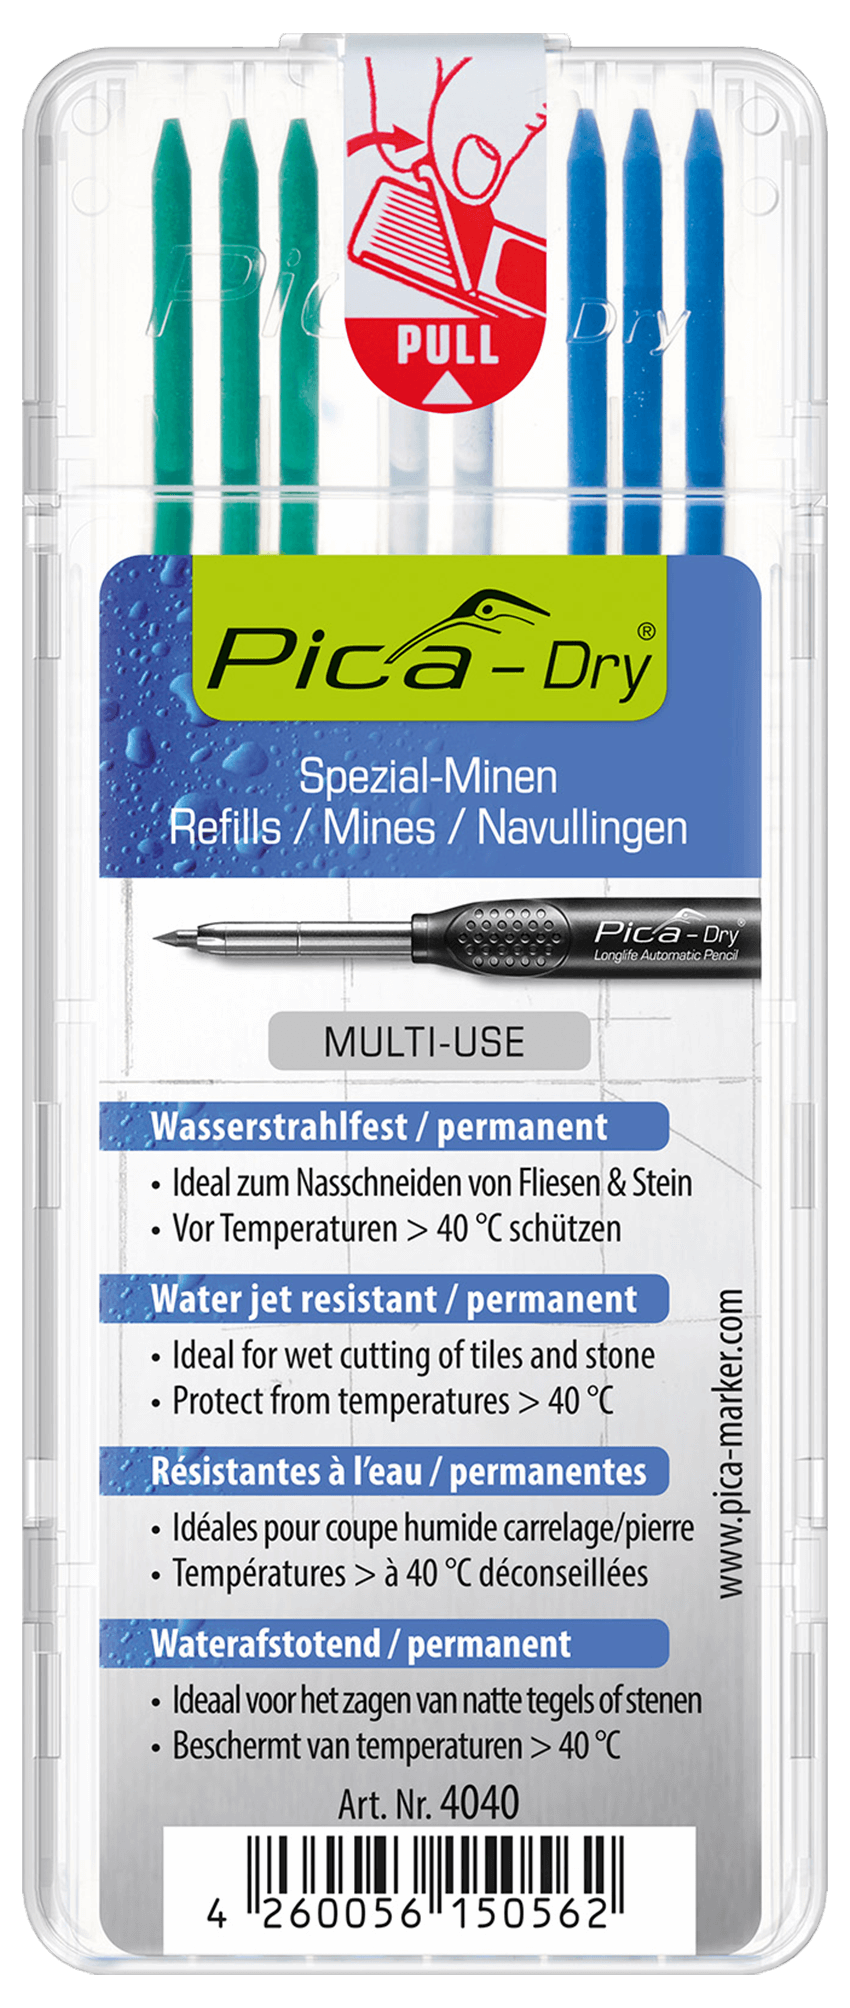 Pica Dry Longlife Automatic Pencil Refills "Waterjet Resistant" 4040